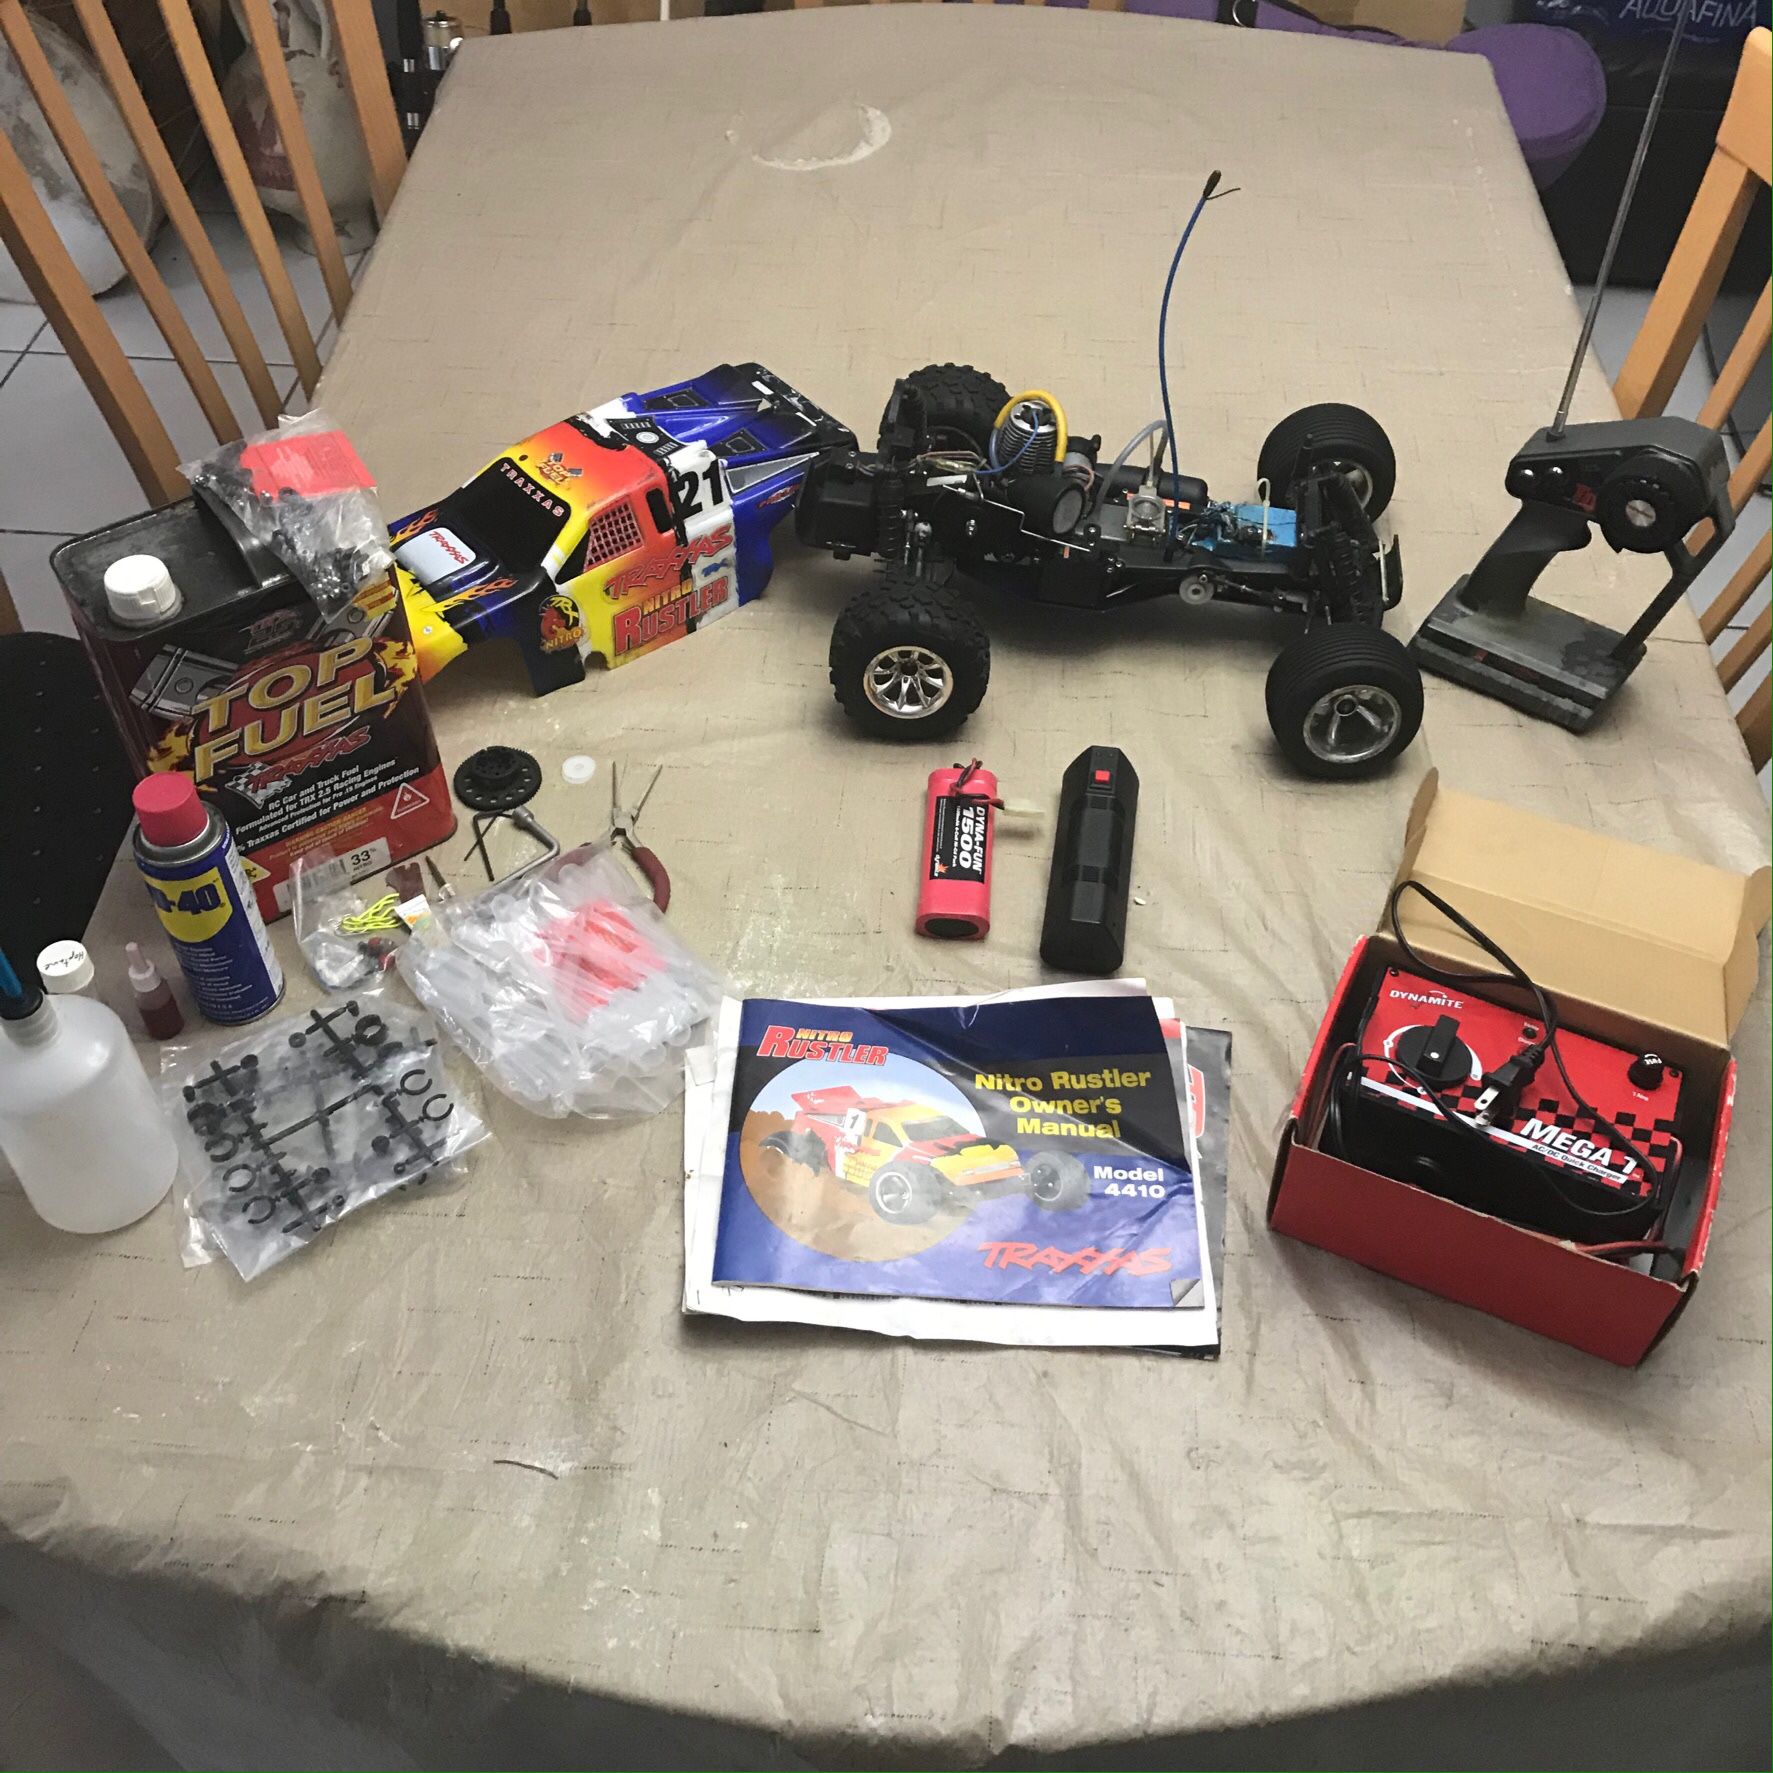 TRAXXAS Nitro Rustler RTR Stadium Truck and everything in the pictures